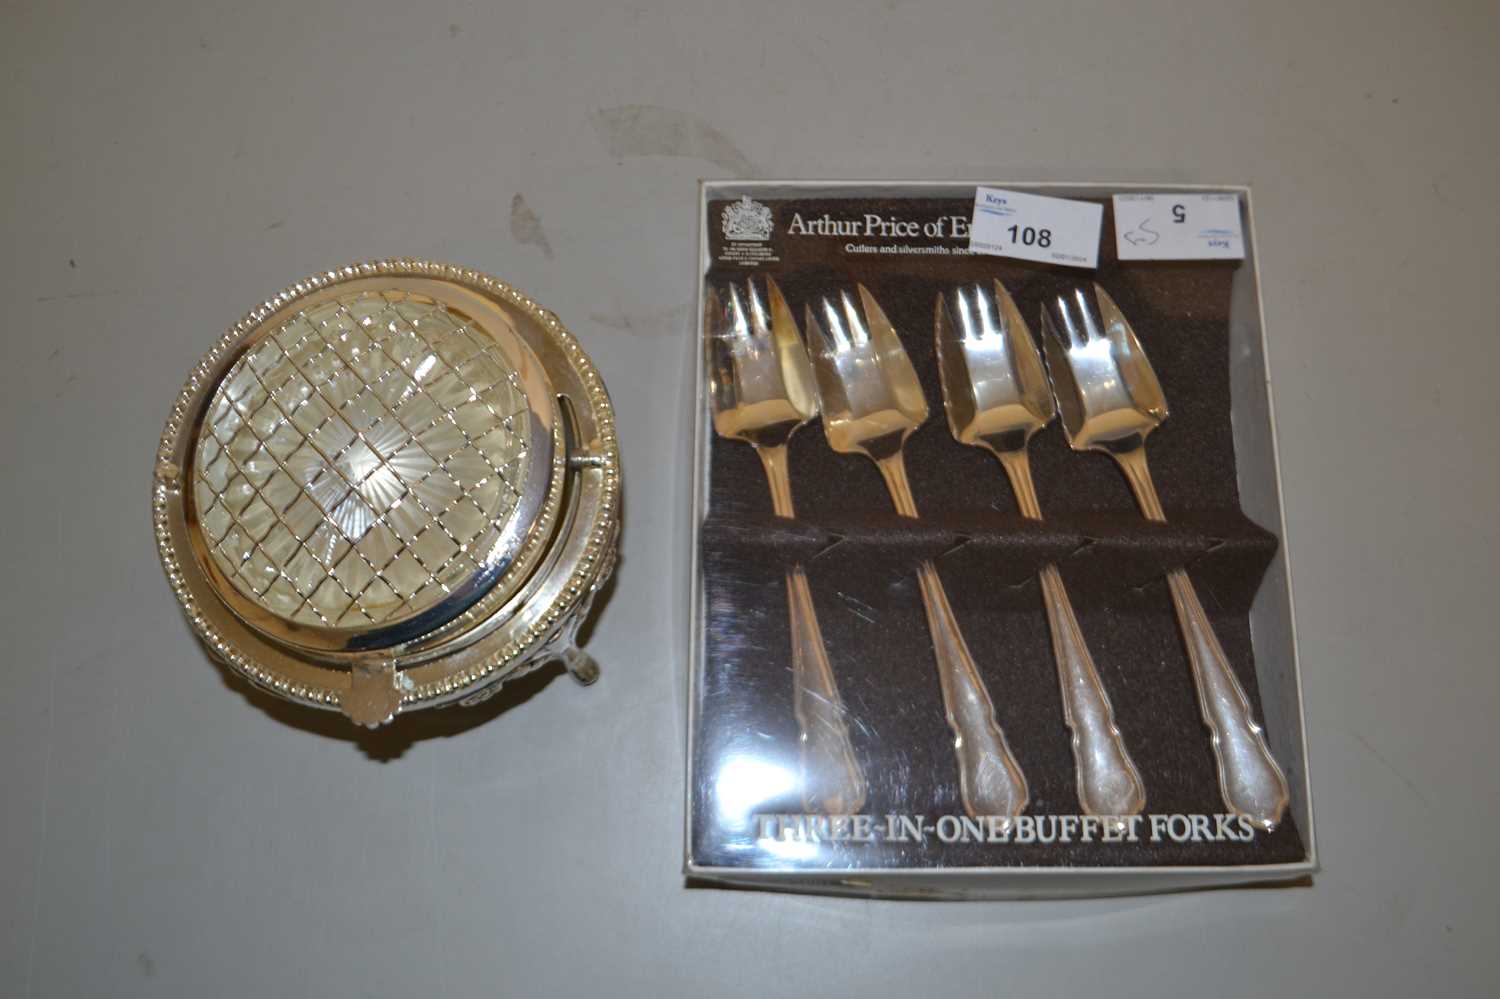 Mixed Lot: Various assorted silver plated cutlery and other items